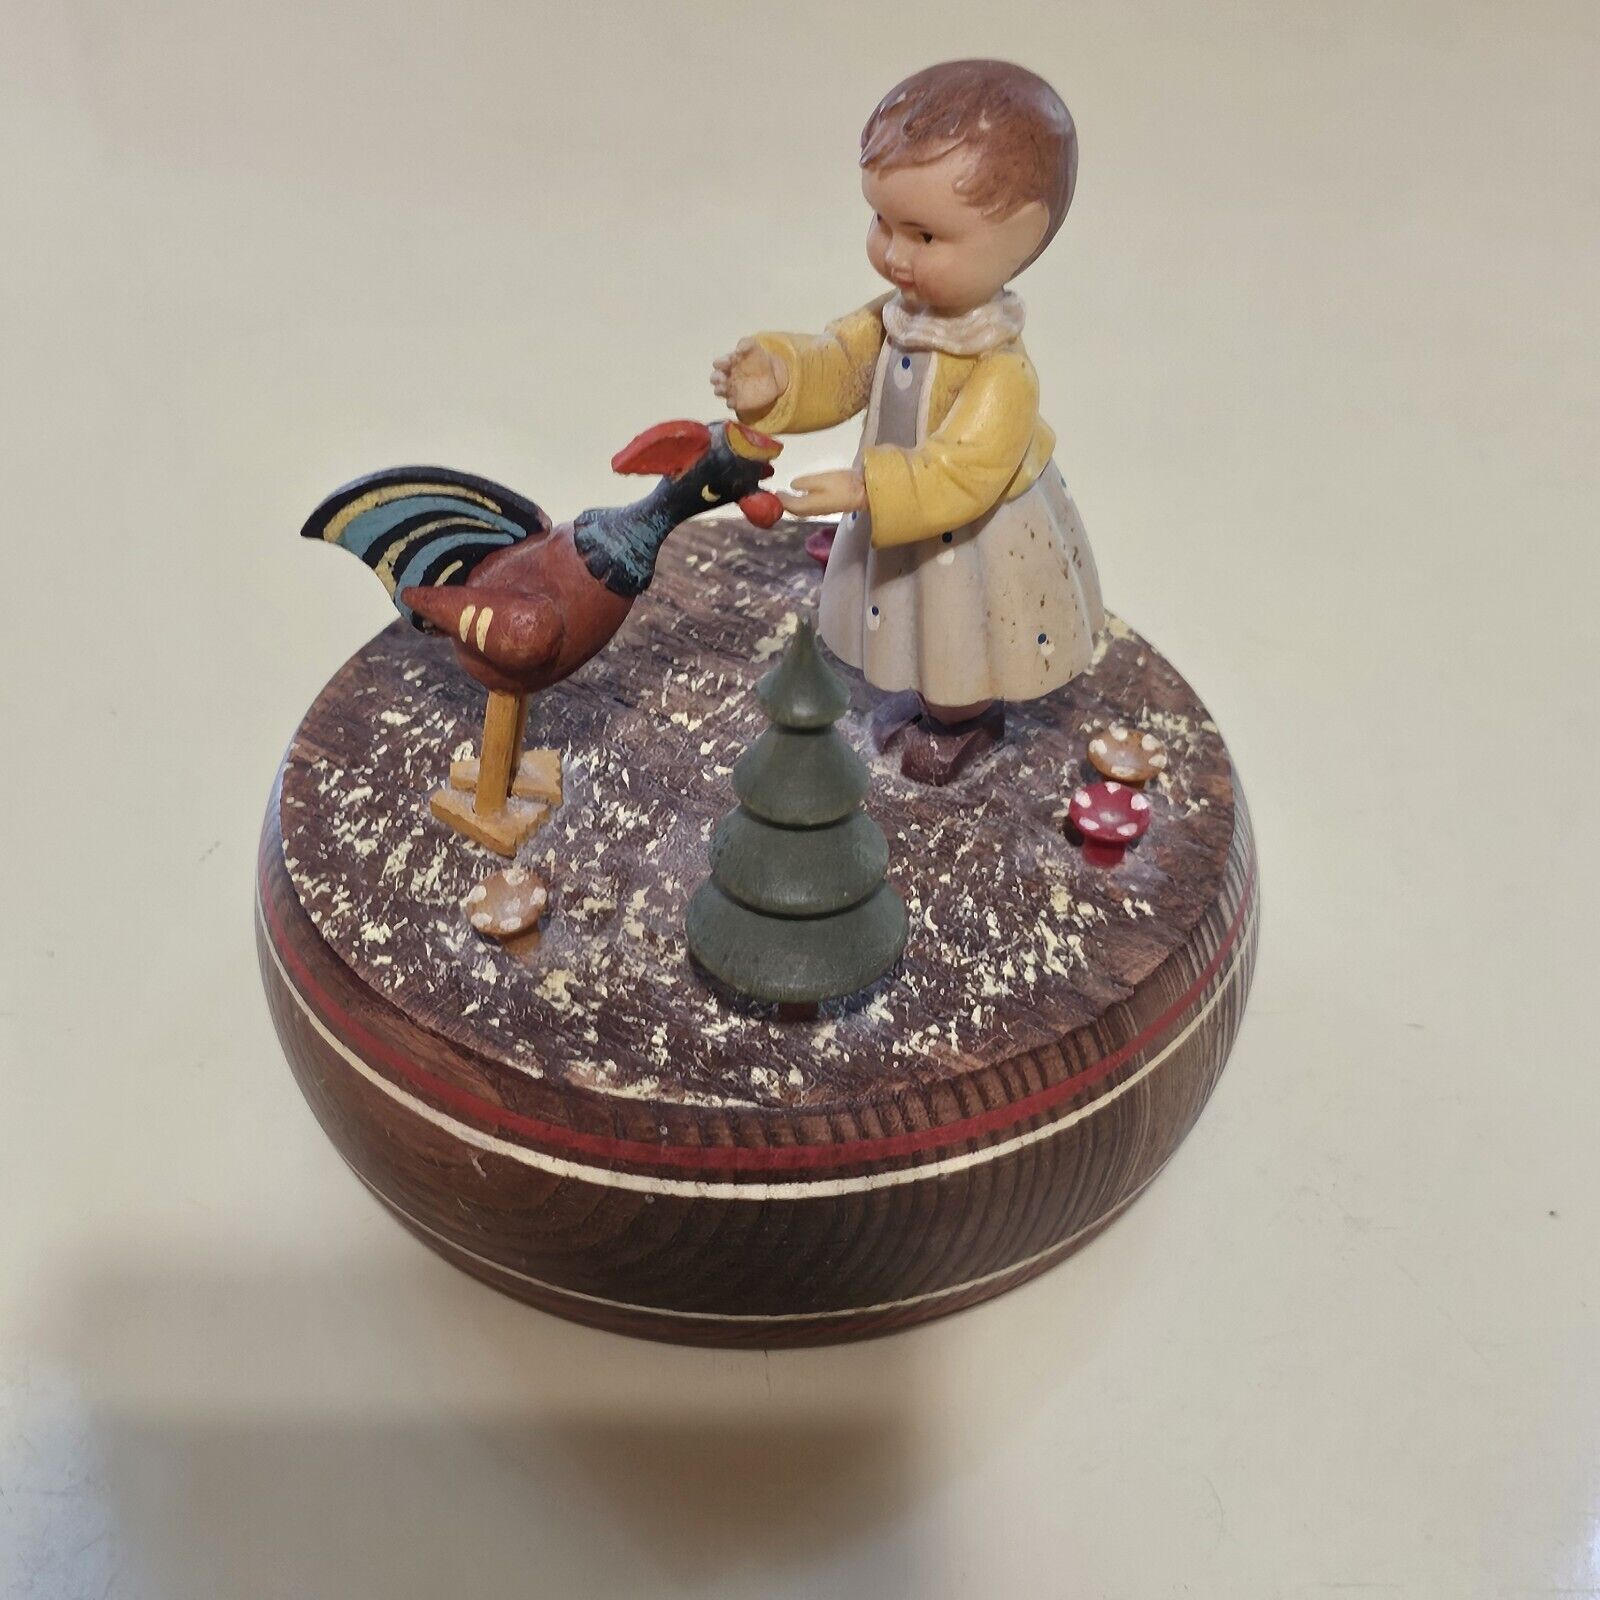 Vt. 40s/50s Anri Thorens Movement music box Girl With Rooster Tree + Mushrooms